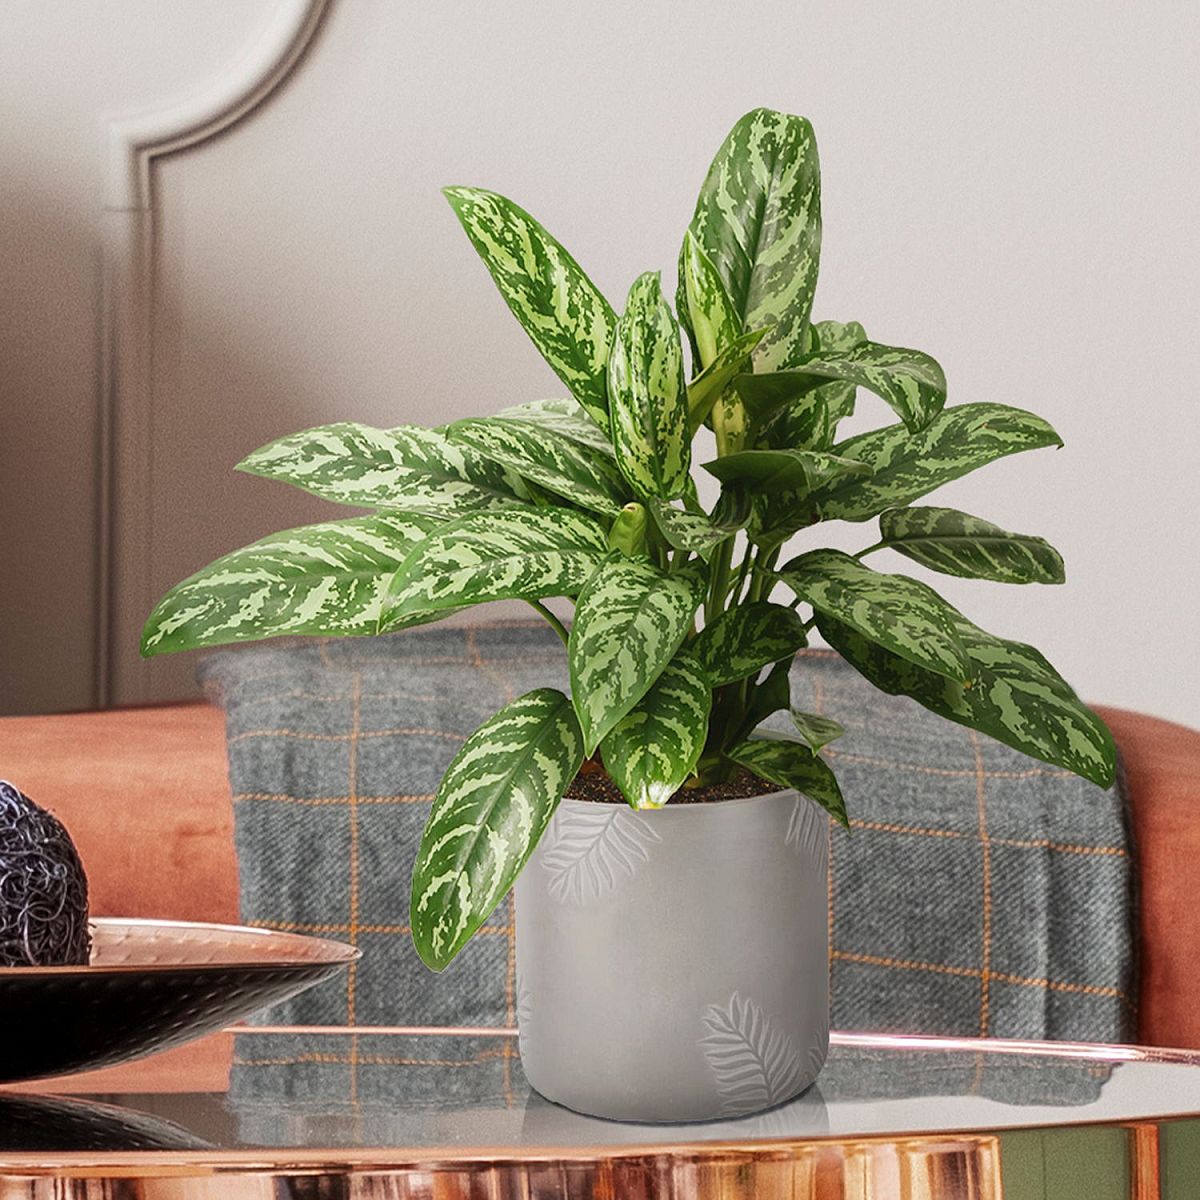 Leaf Embossed Table Indoor Cylinder Round Plant Pot by Idealist Lite